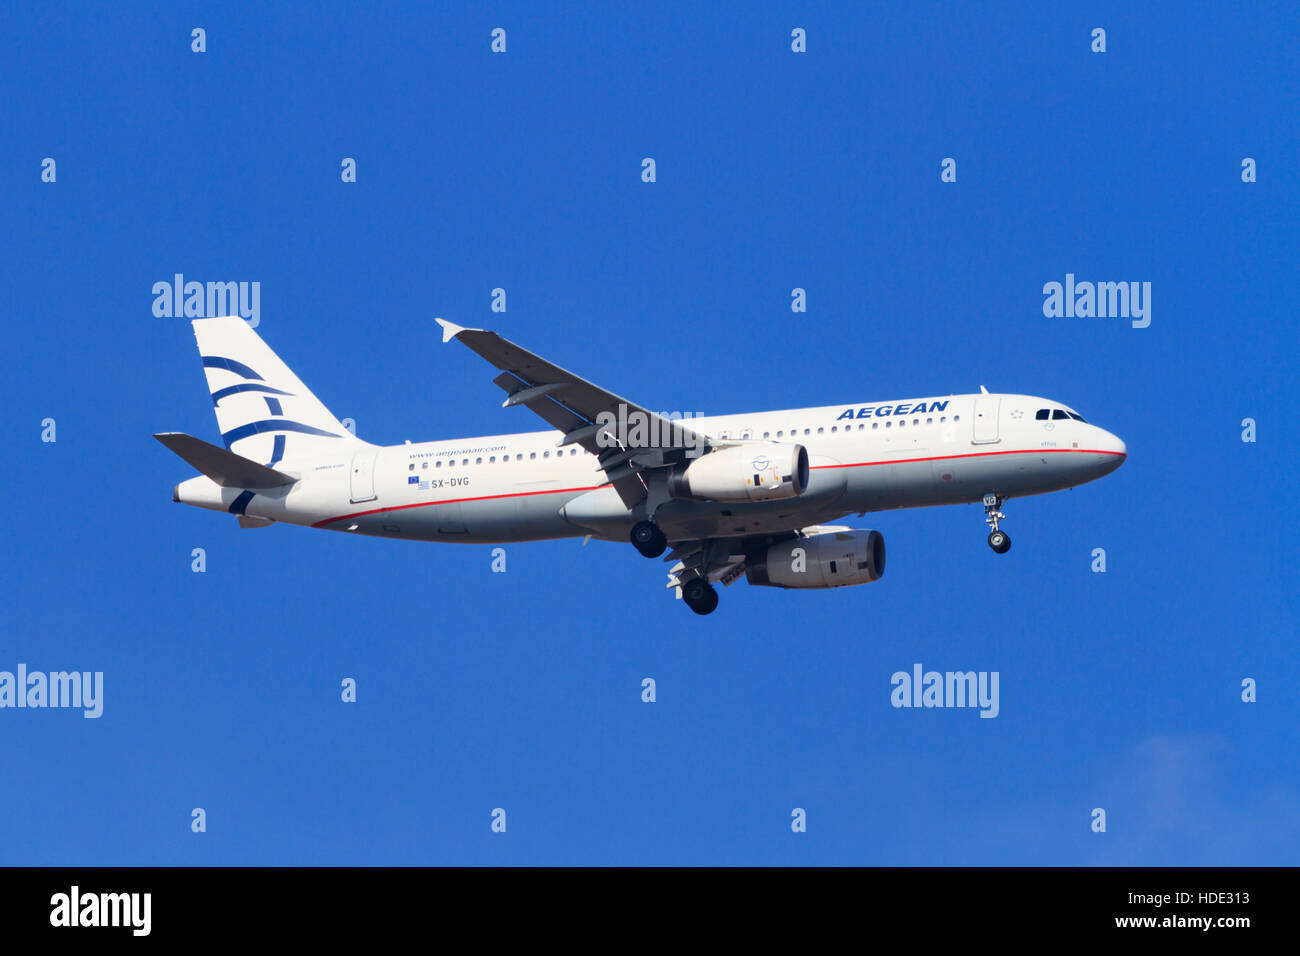 Airbus A320-232 , SX-DVG of Aegean Airline on approach to Larnaca airport, Cyprus. Canon 7D, Canon 100-400f4 Stock Photo